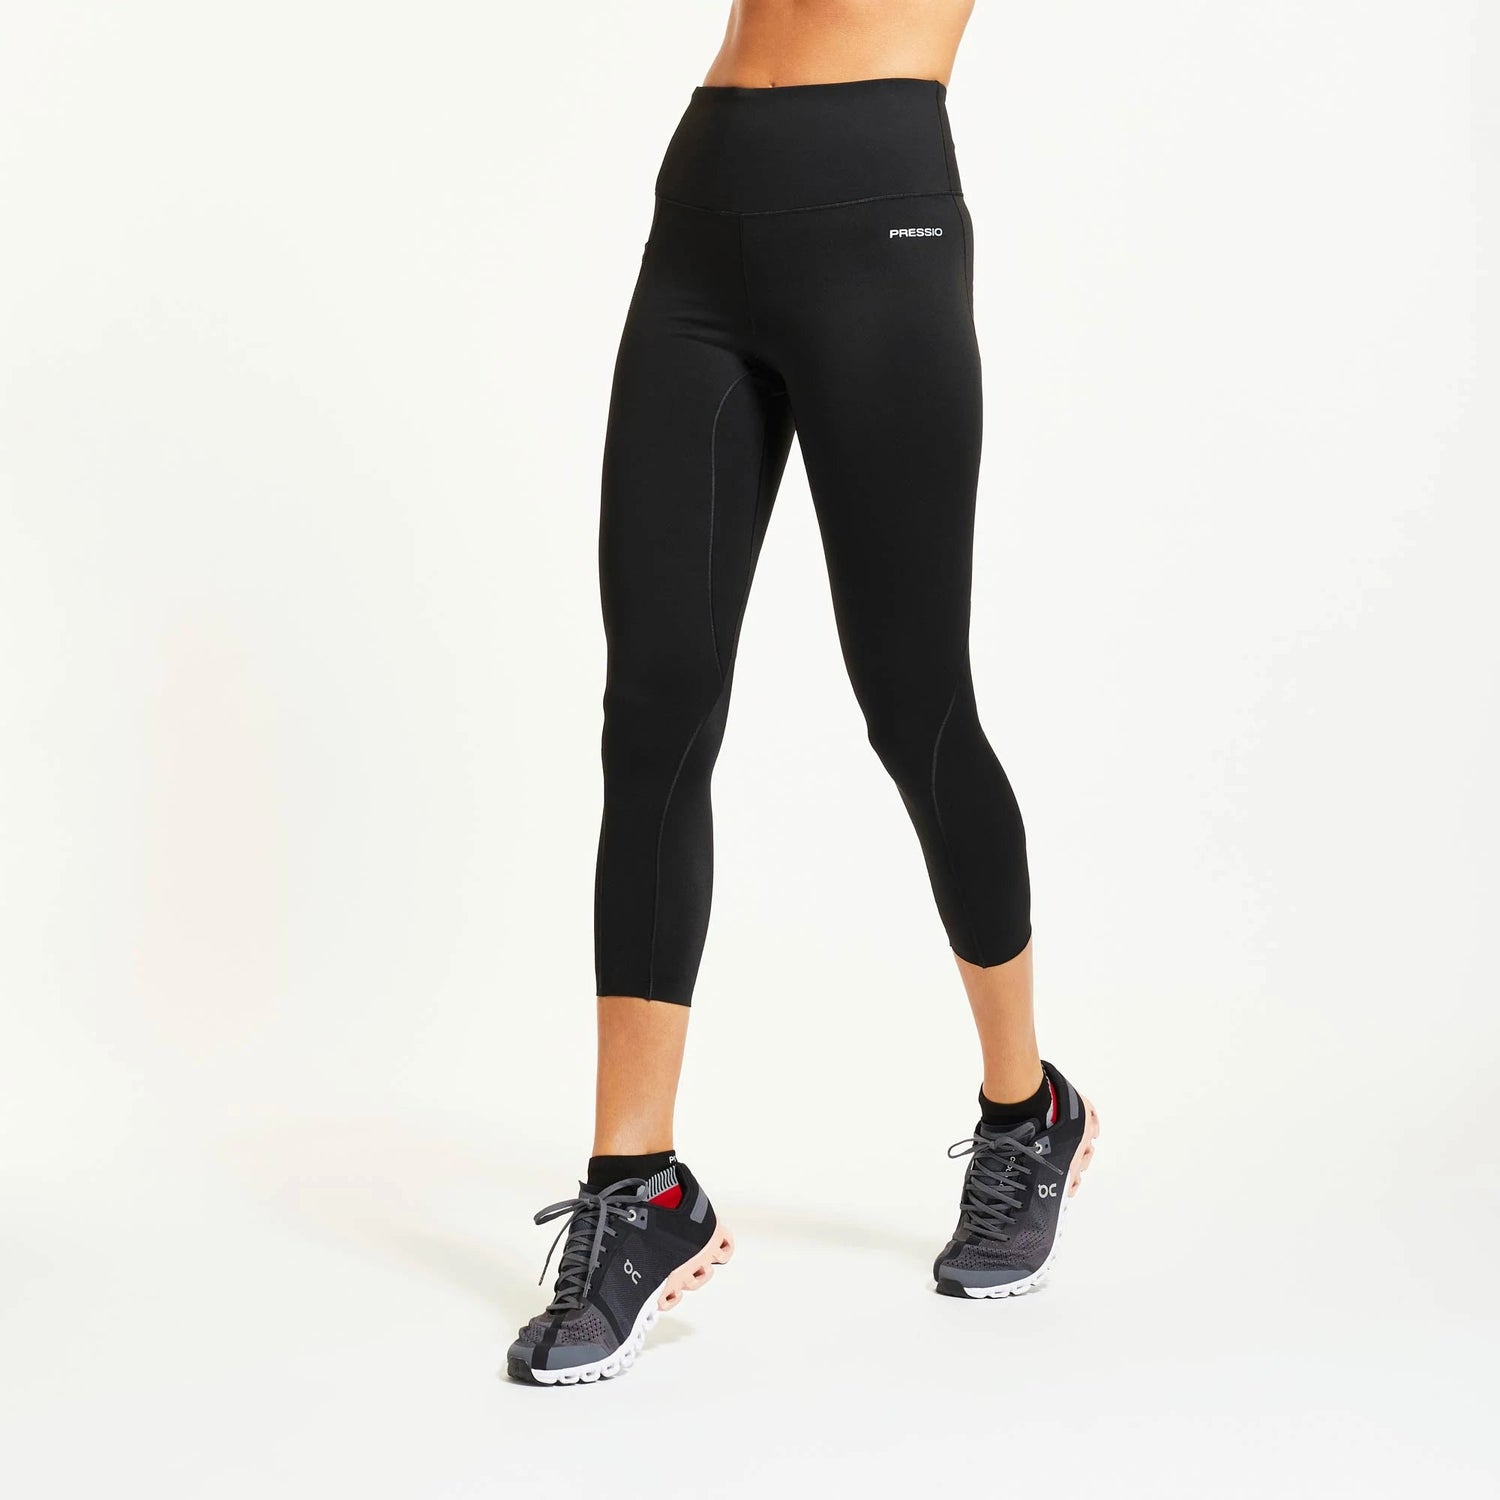 Pressio - W's Compression 7/8 Tight | High Rise - Eco Dyed Nylon - Weekendbee - sustainable sportswear